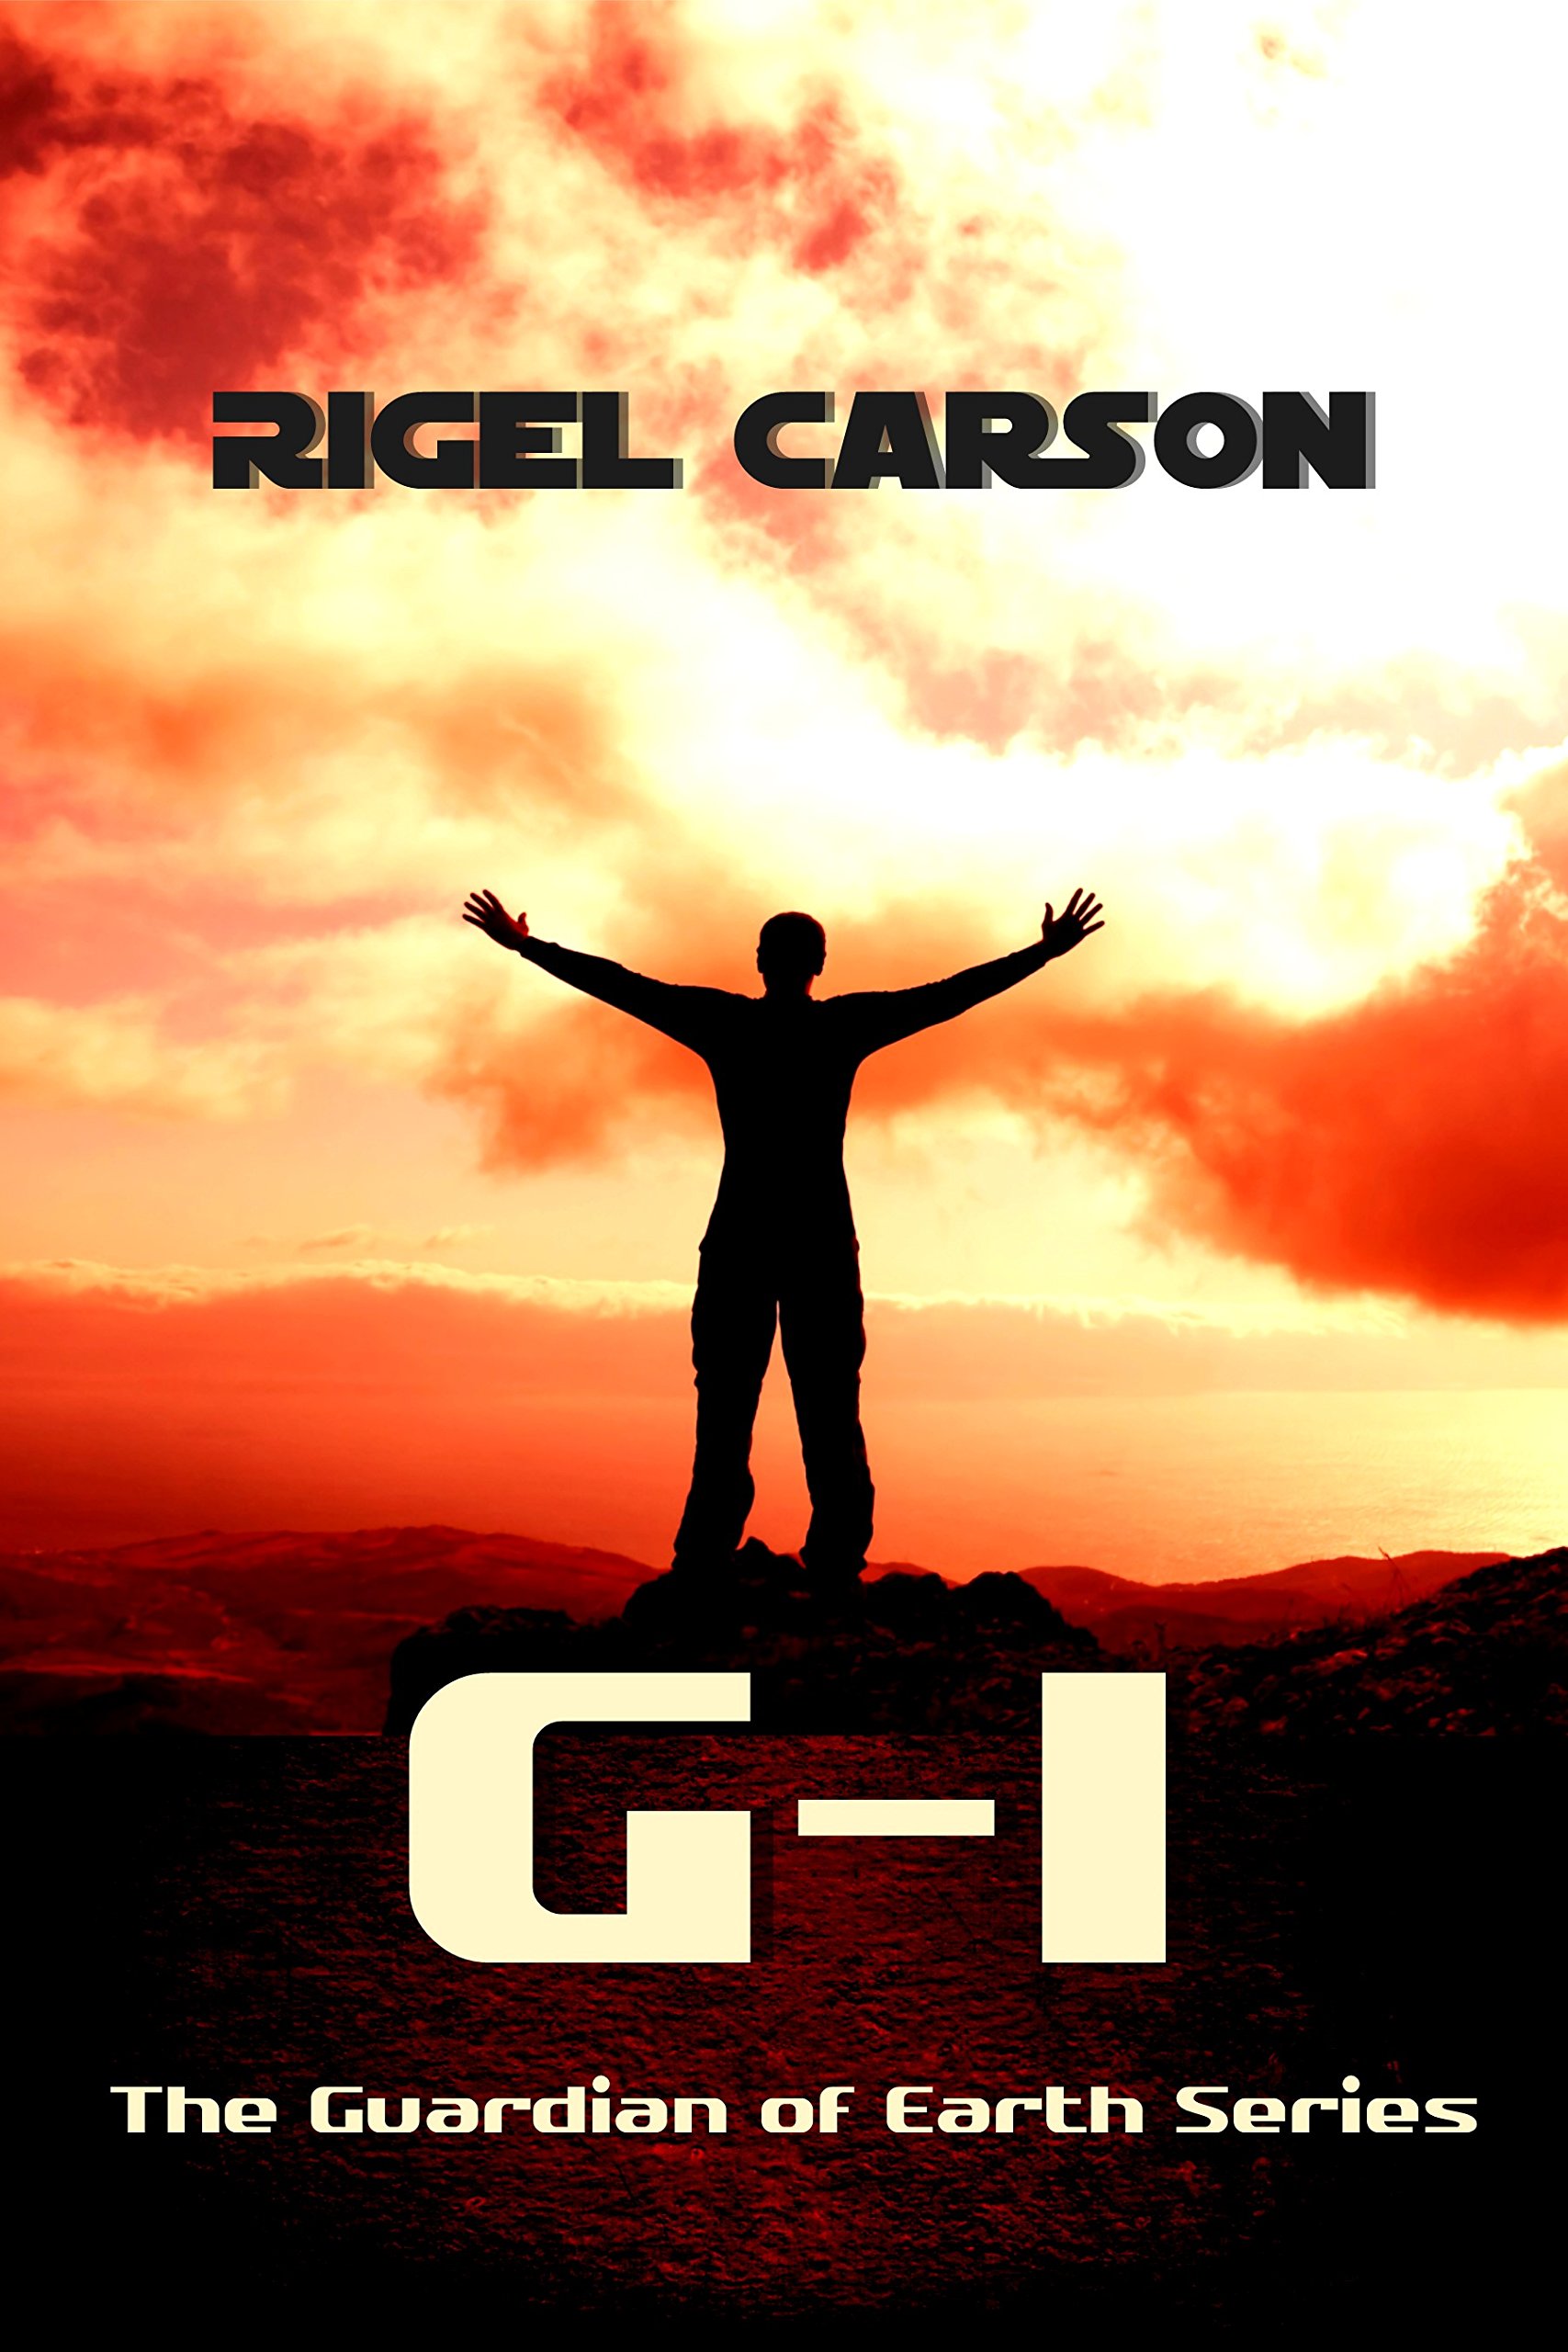 Books in Order: Your Comprehensive Guide to Rigel Carson’s Works